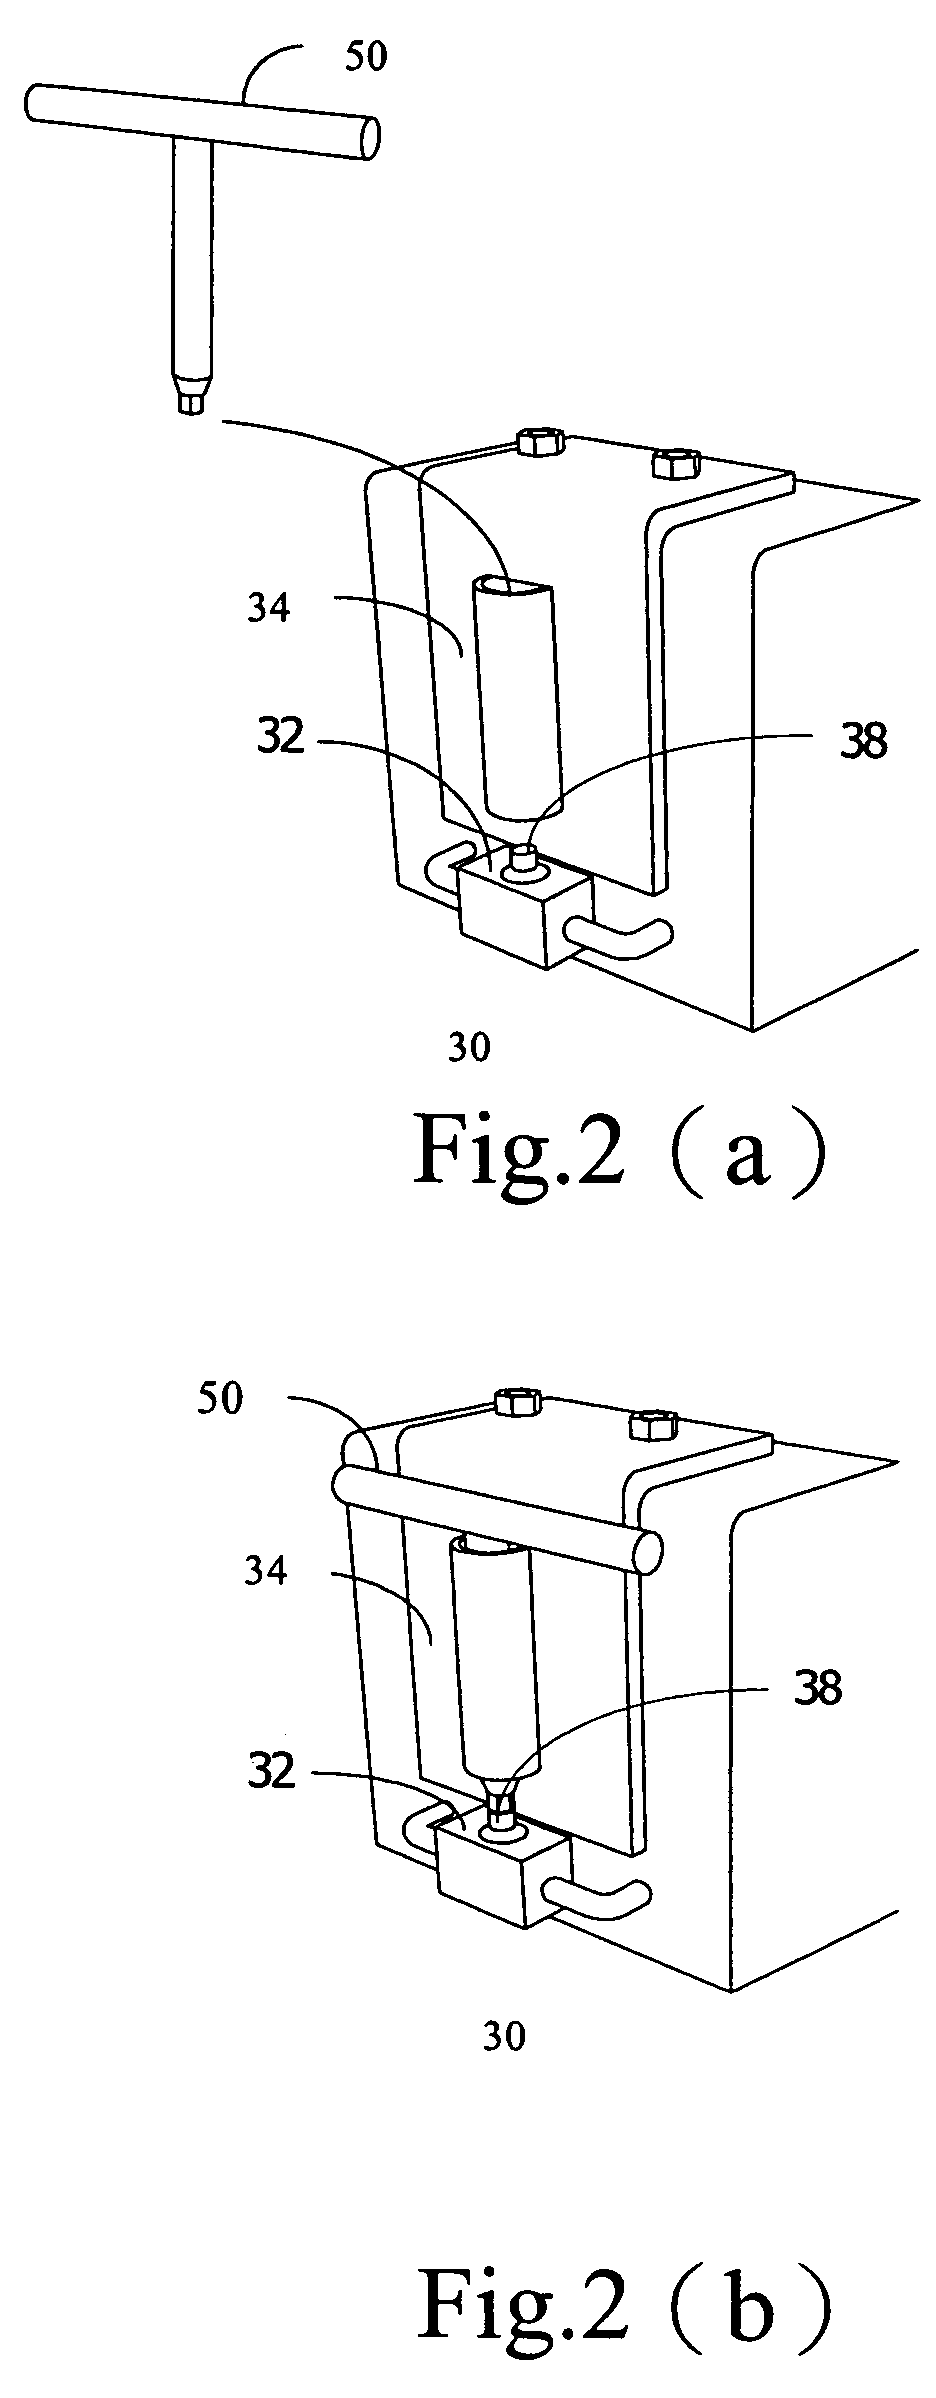 Safety apparatus in connection with work loading device to safe guard machine tools operation